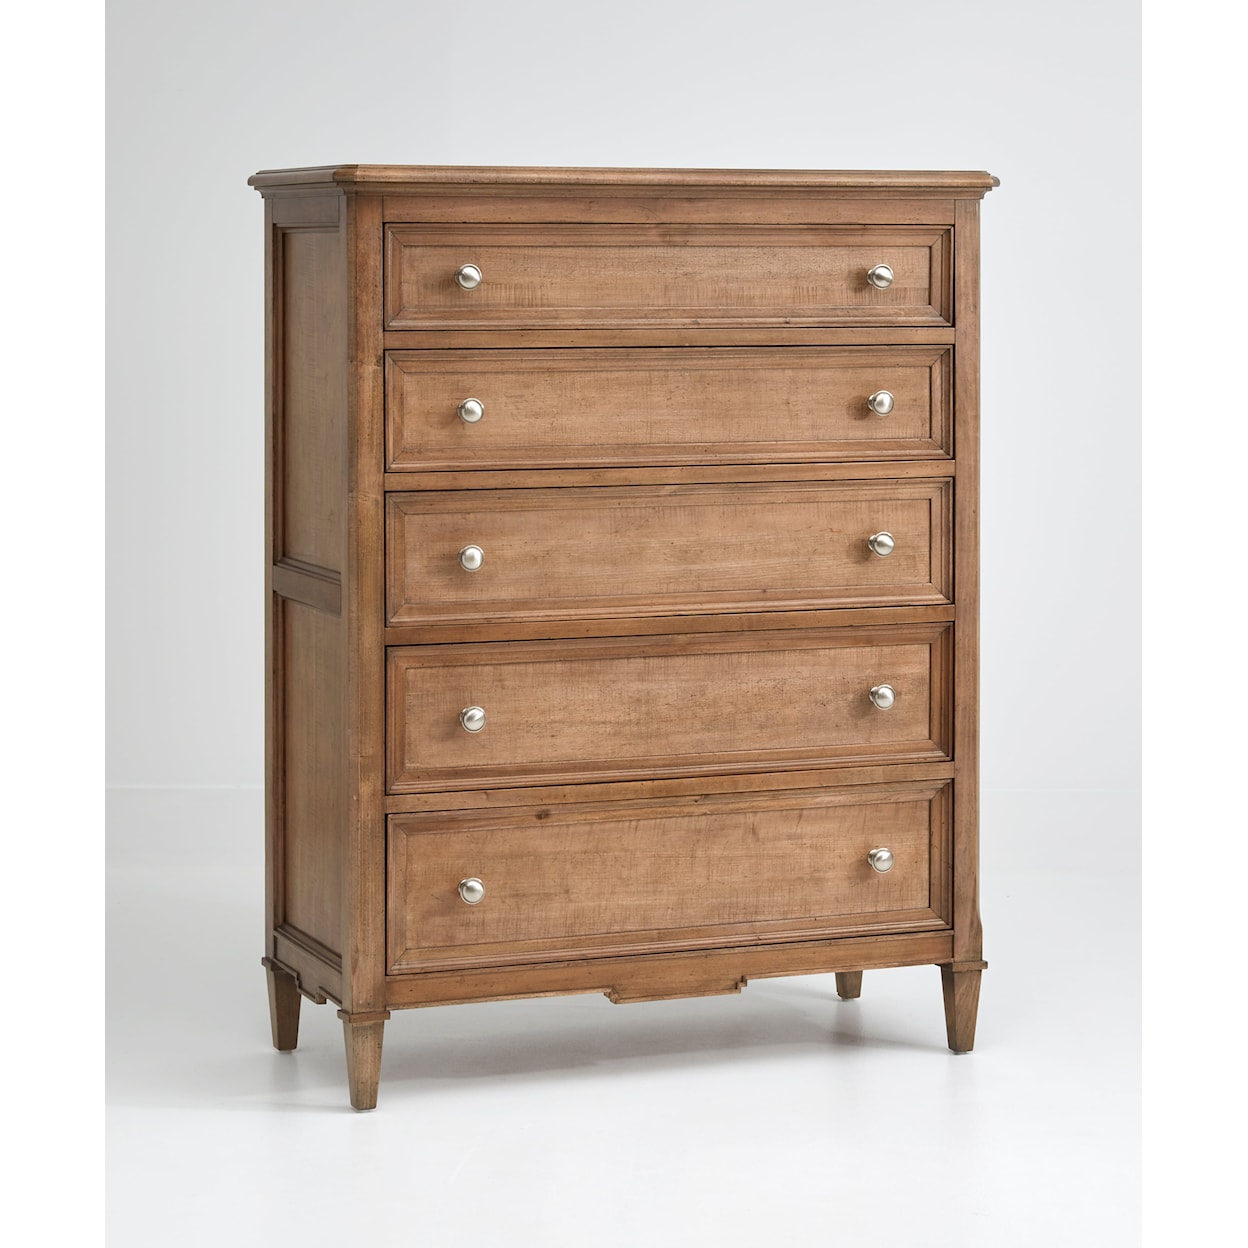 The Preserve Briar Patch Chest of Drawers